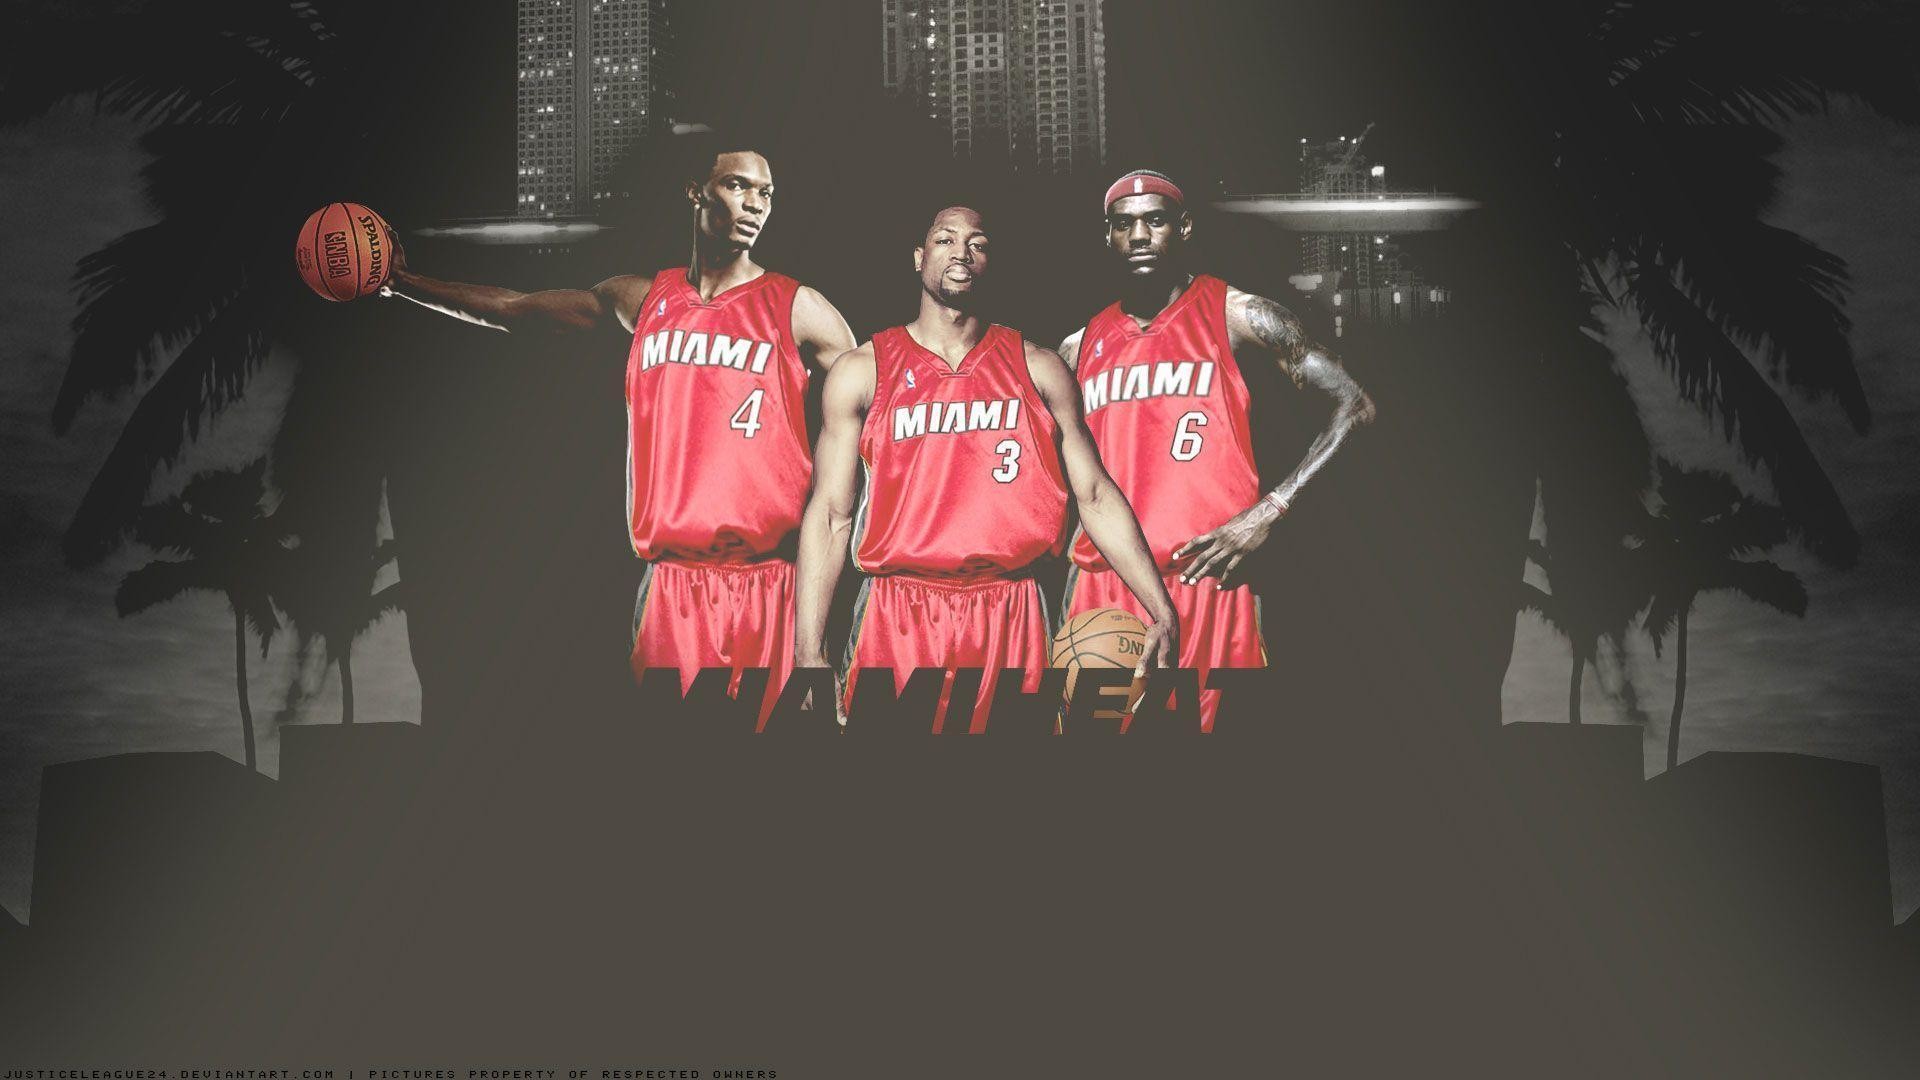 1920x1080 Miami Heat Wallpapers at BasketWallpapers.